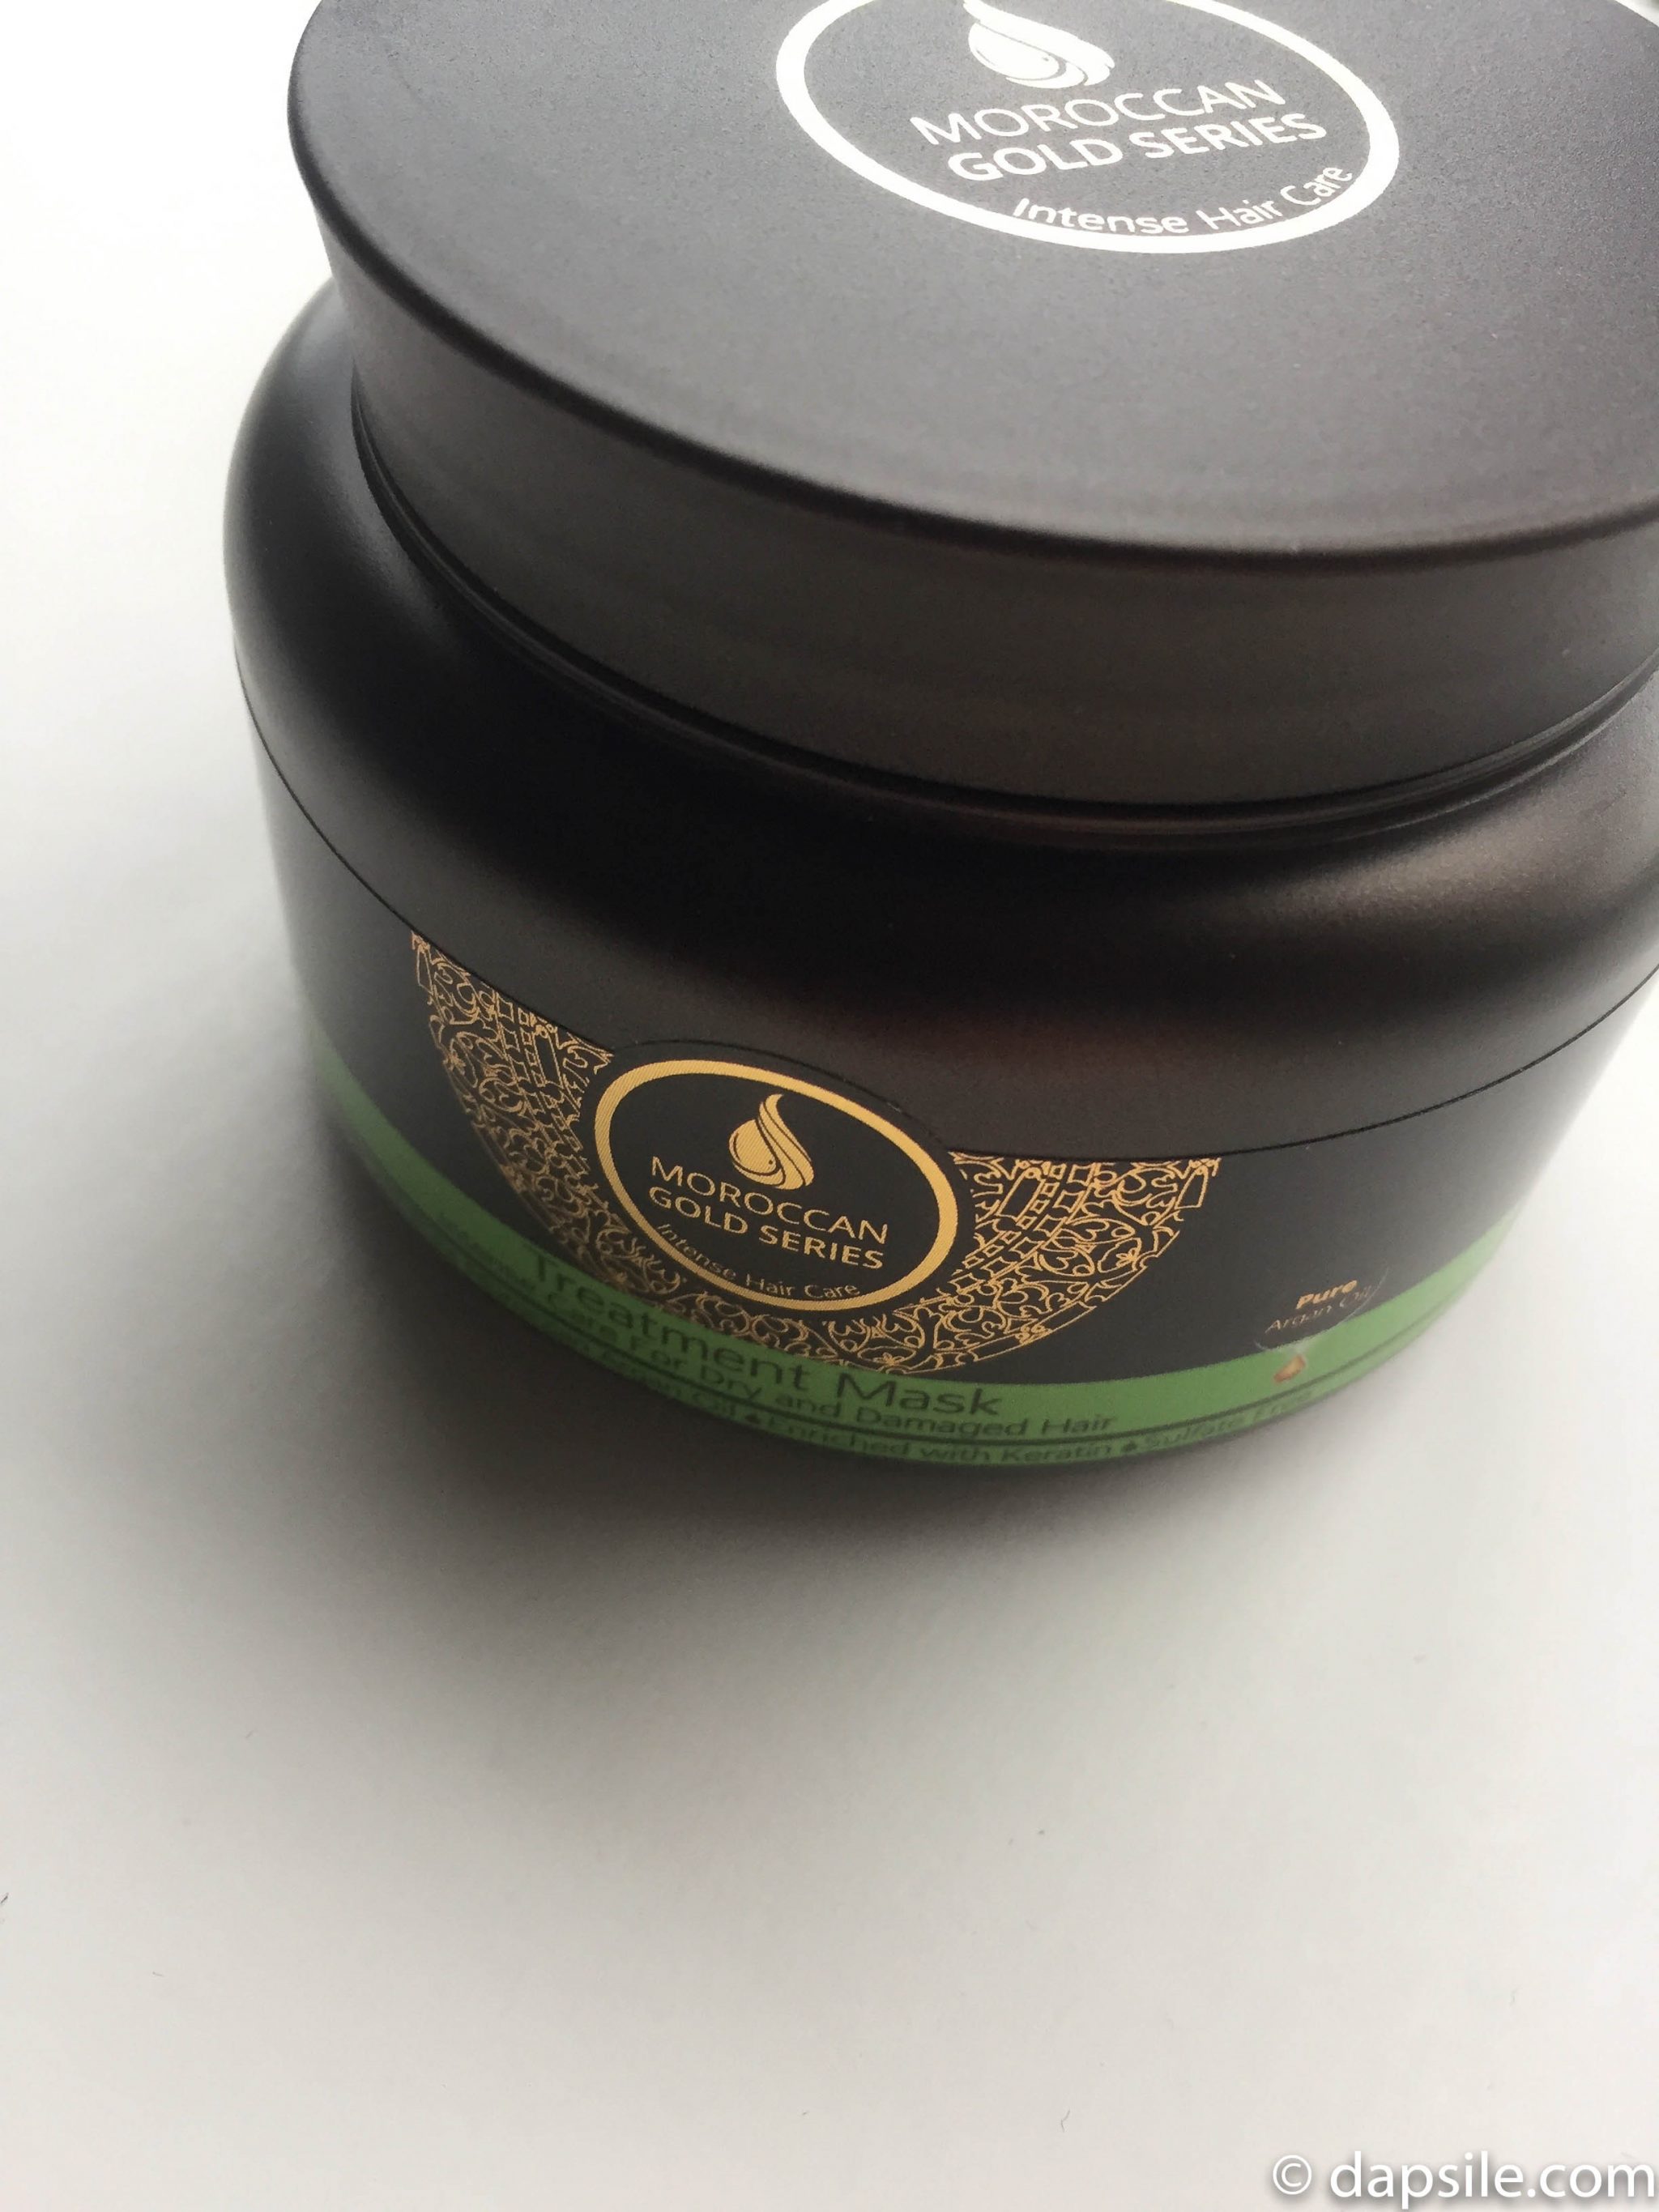 Moroccan Gold Series Hair Mask